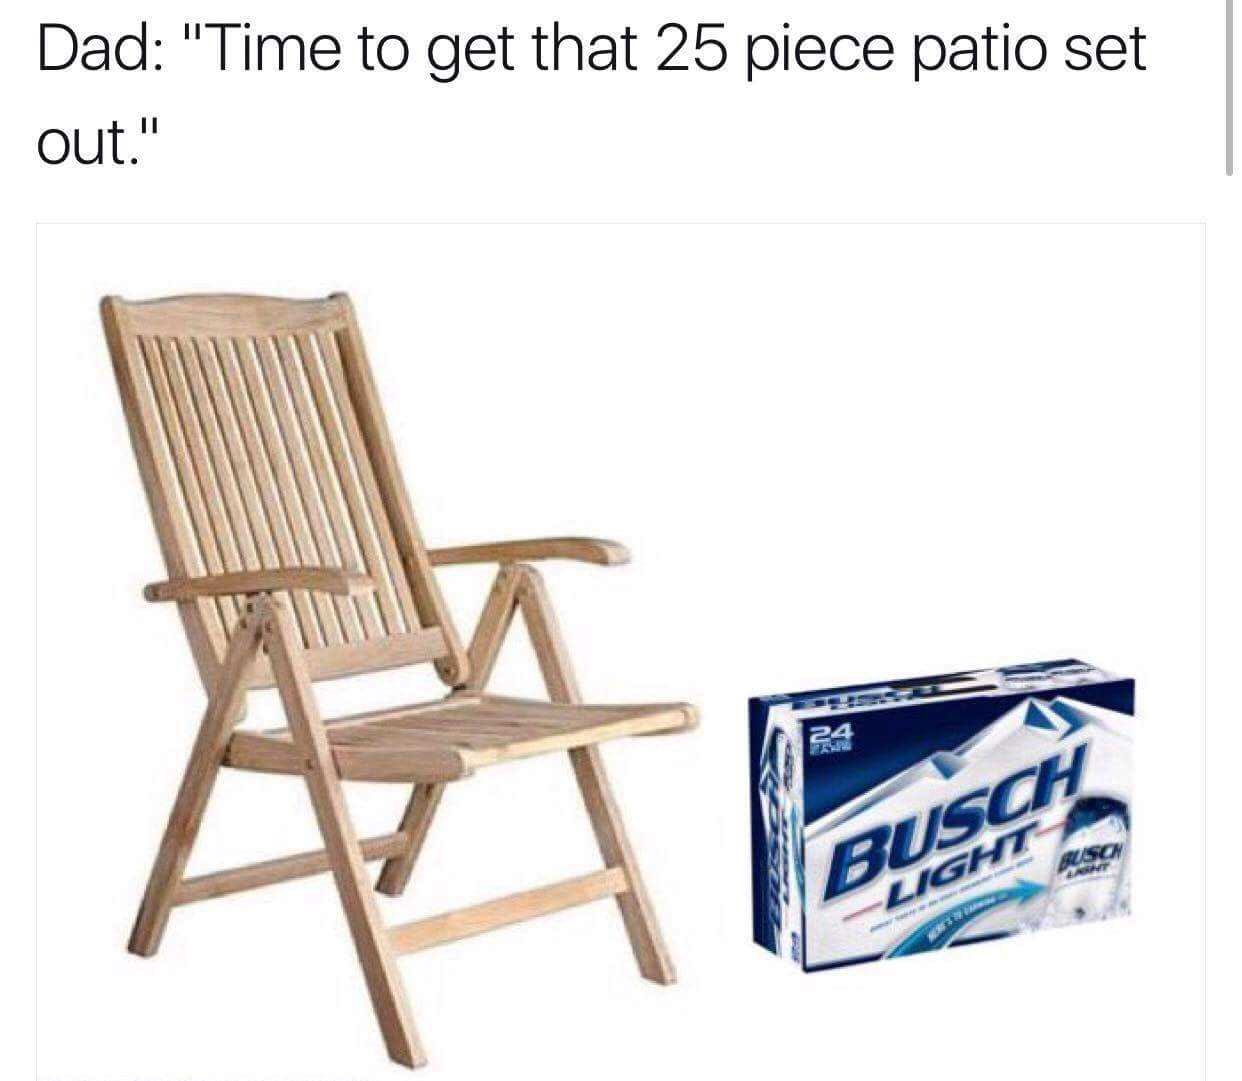 Time to crack a cold one with the bois - meme